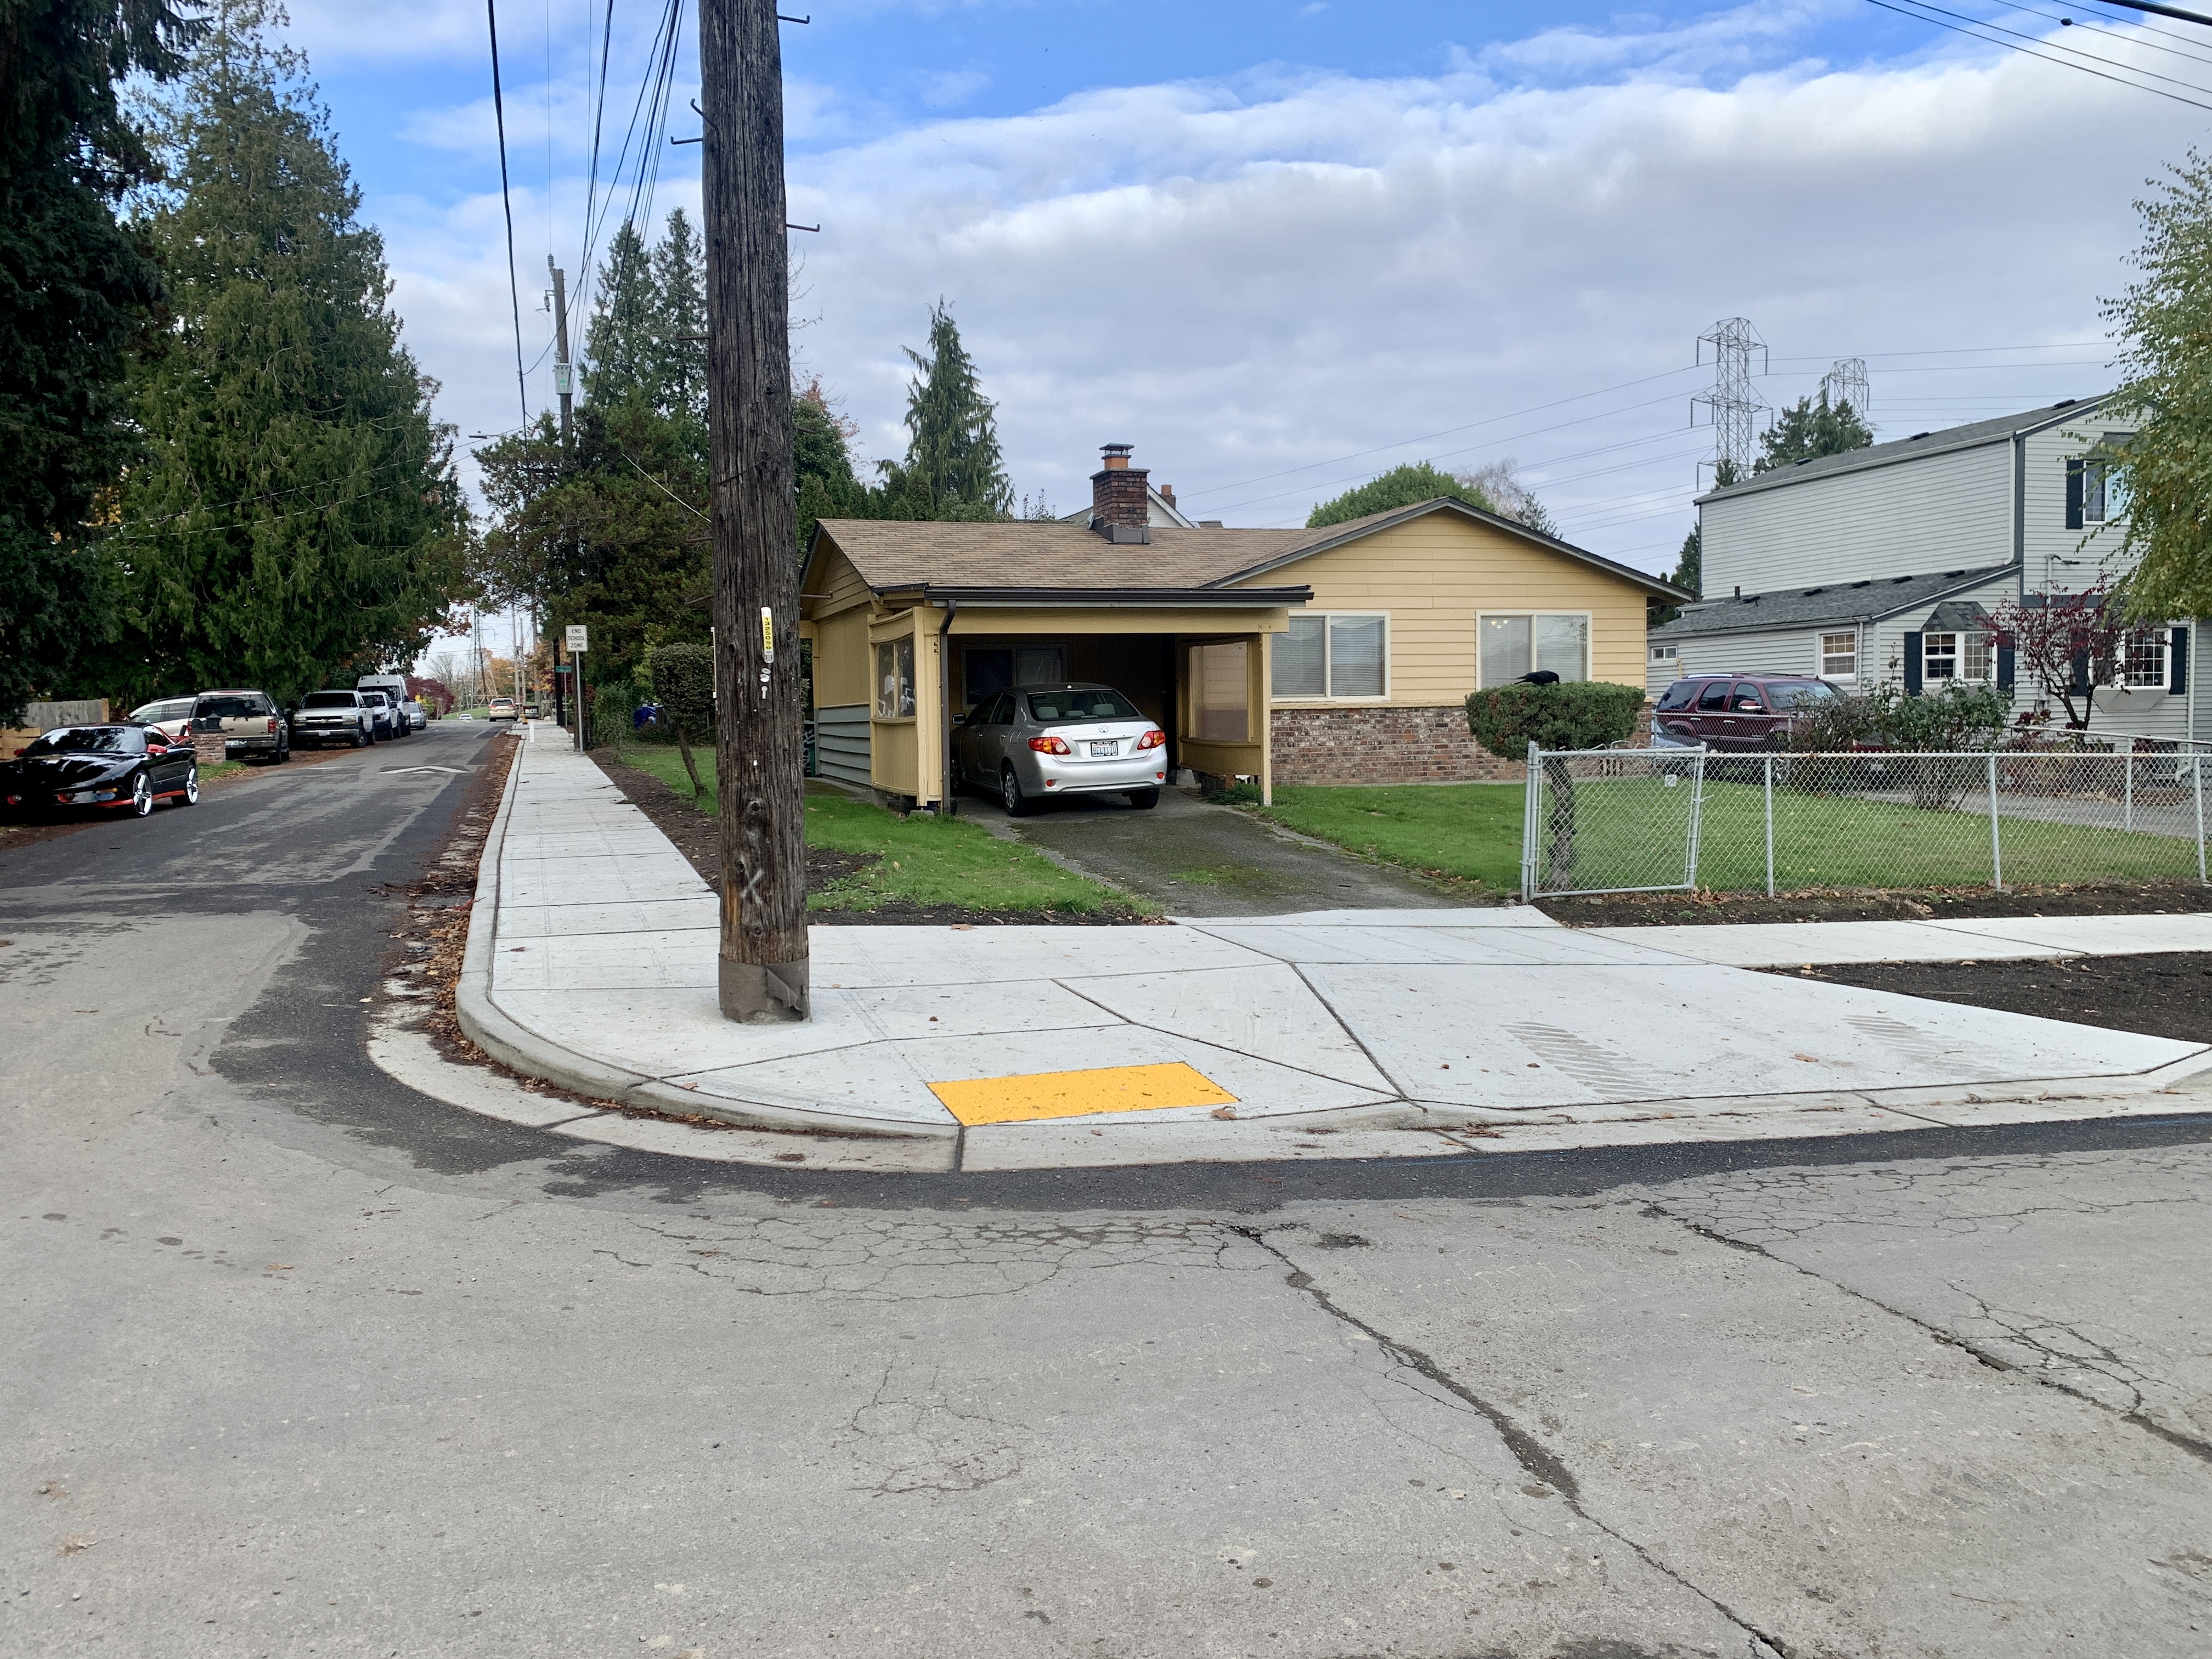 Near Wing Luke Elementary, a new sidewalk and curb ramp are complete.